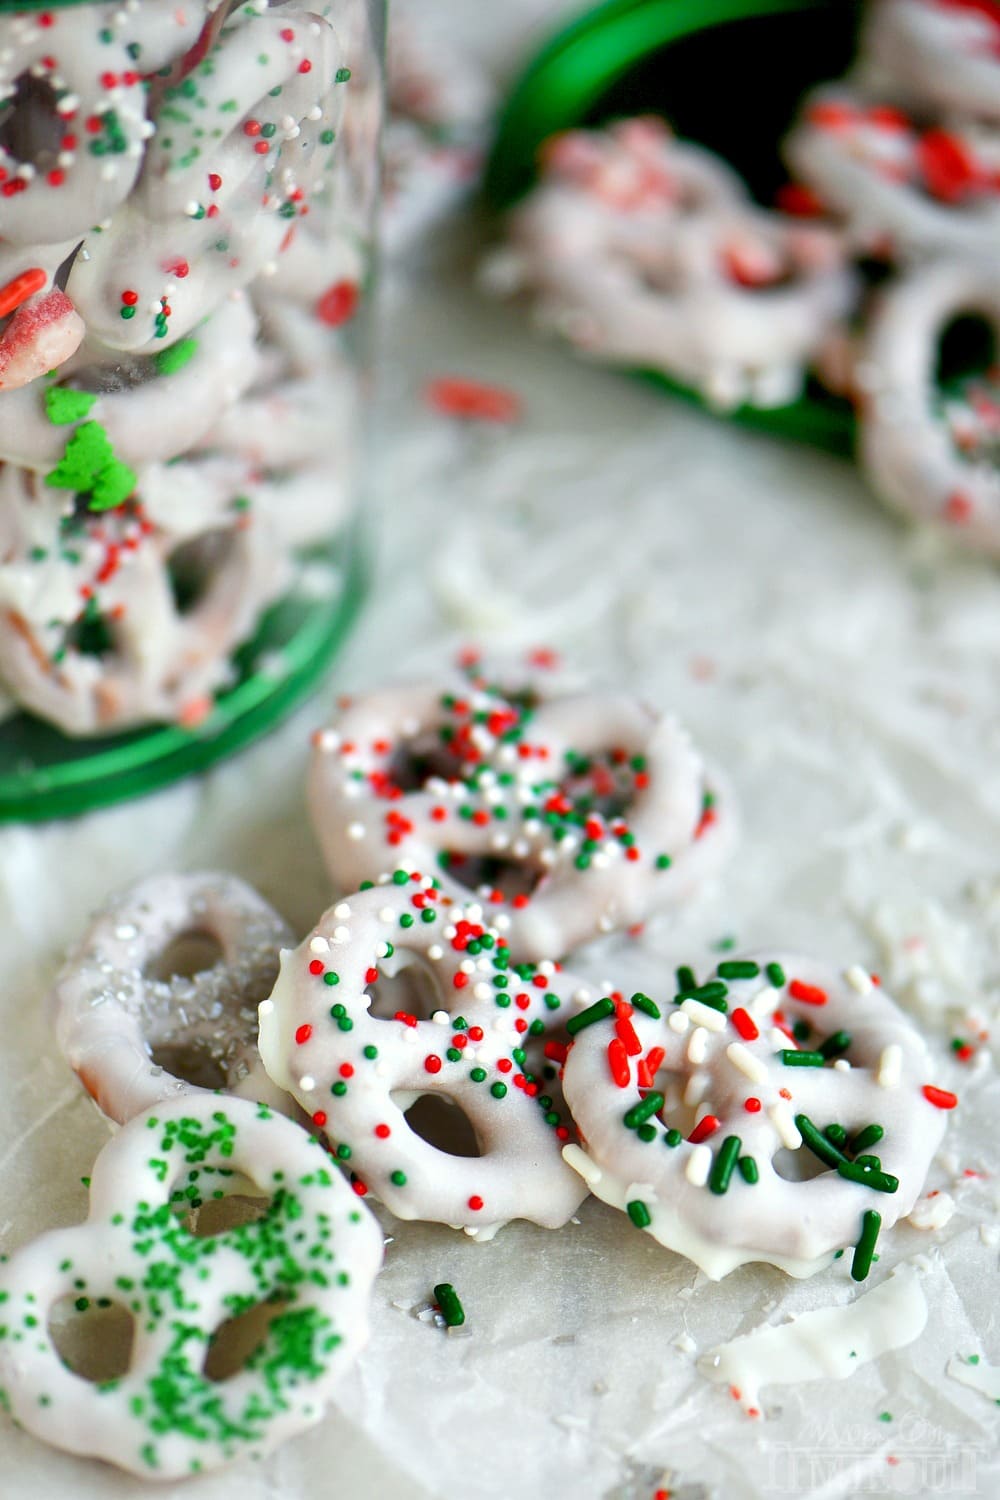 Step by step instructions for the perfect easy White Chocolate Covered Pretzels! Learn how to get perfectly dipped pretzels every time! Decorate with your favorite sprinkles and candies for a holiday treat everyone will love! Great for Christmas and the holidays!